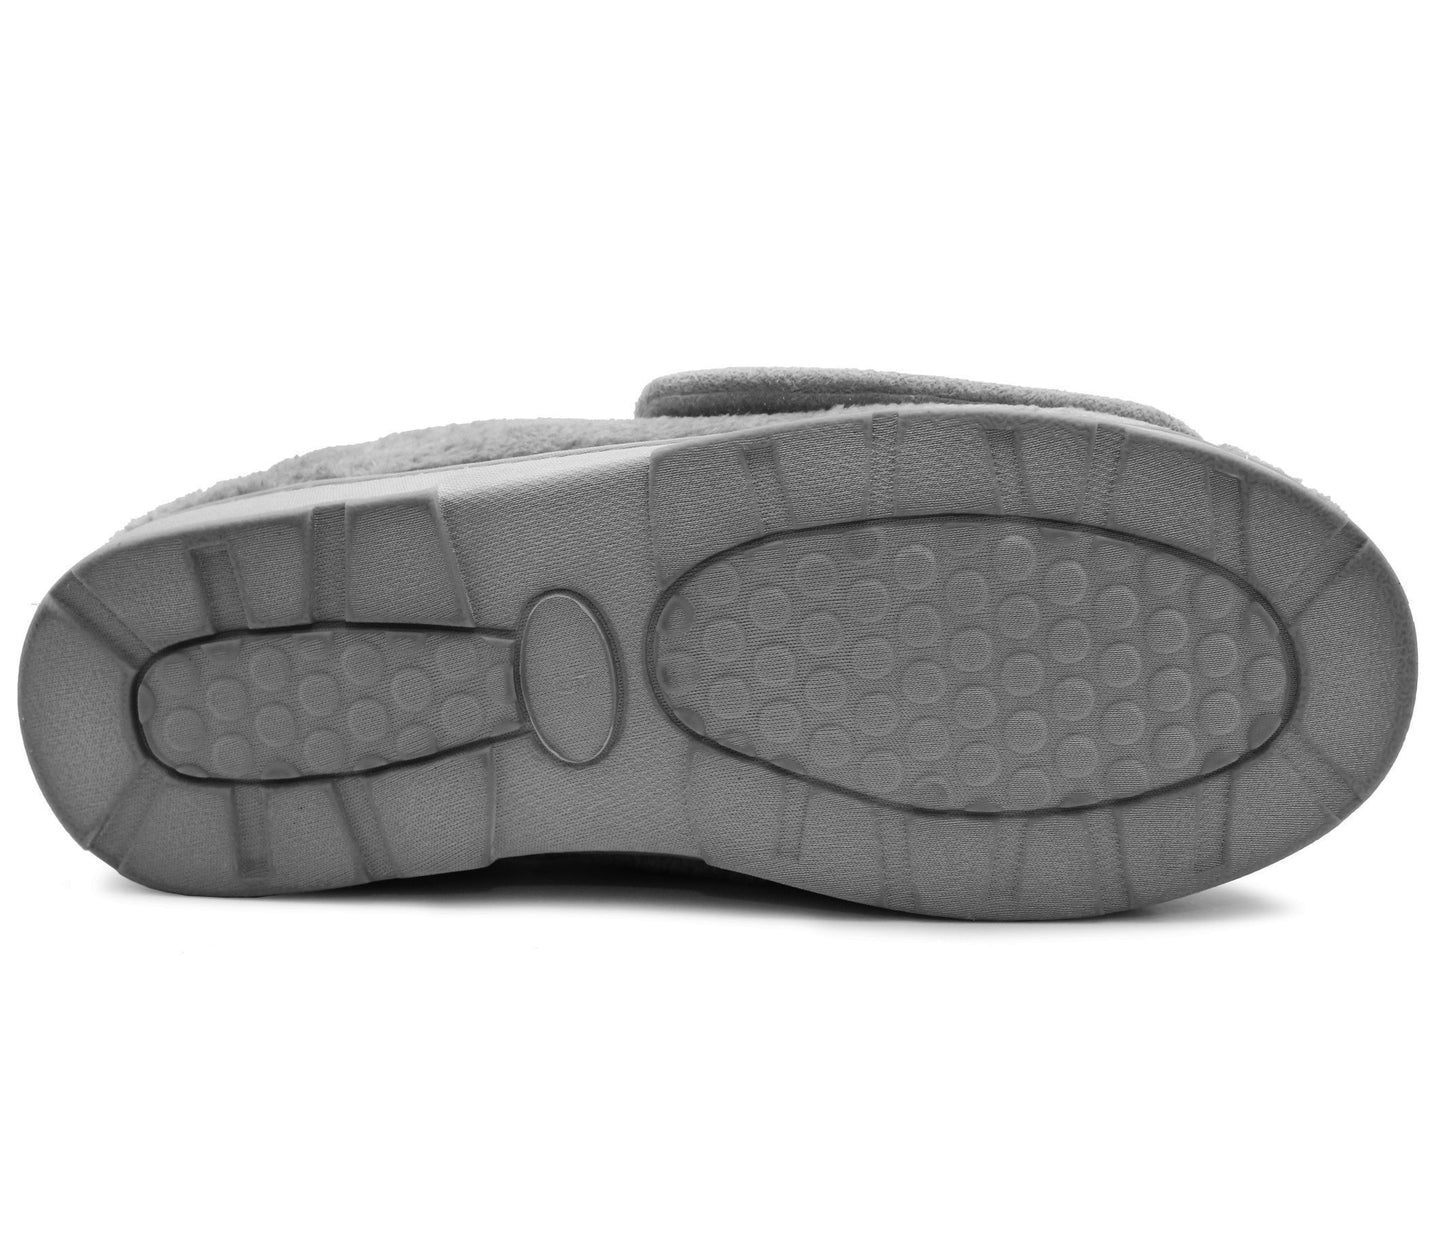 Dr Keller Womens Diabetic Wide Opening Slippers Grey Fur Touch Fasten Ladies Lightweight Slip On Soft House Shoes